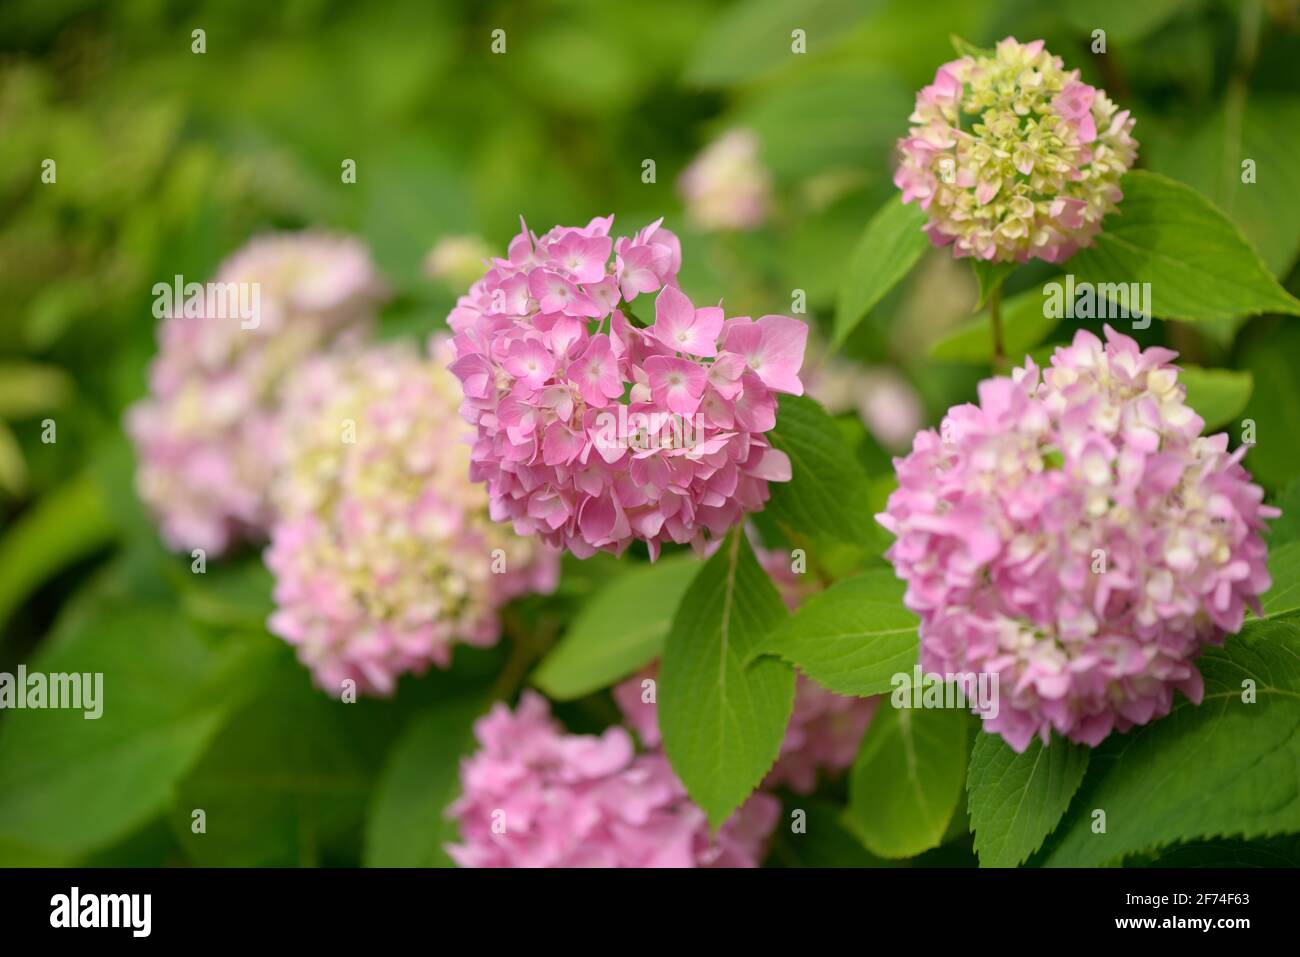 pink hydrangea flowers photographed in blond, uniform light, against a green leafy background Stock Photo